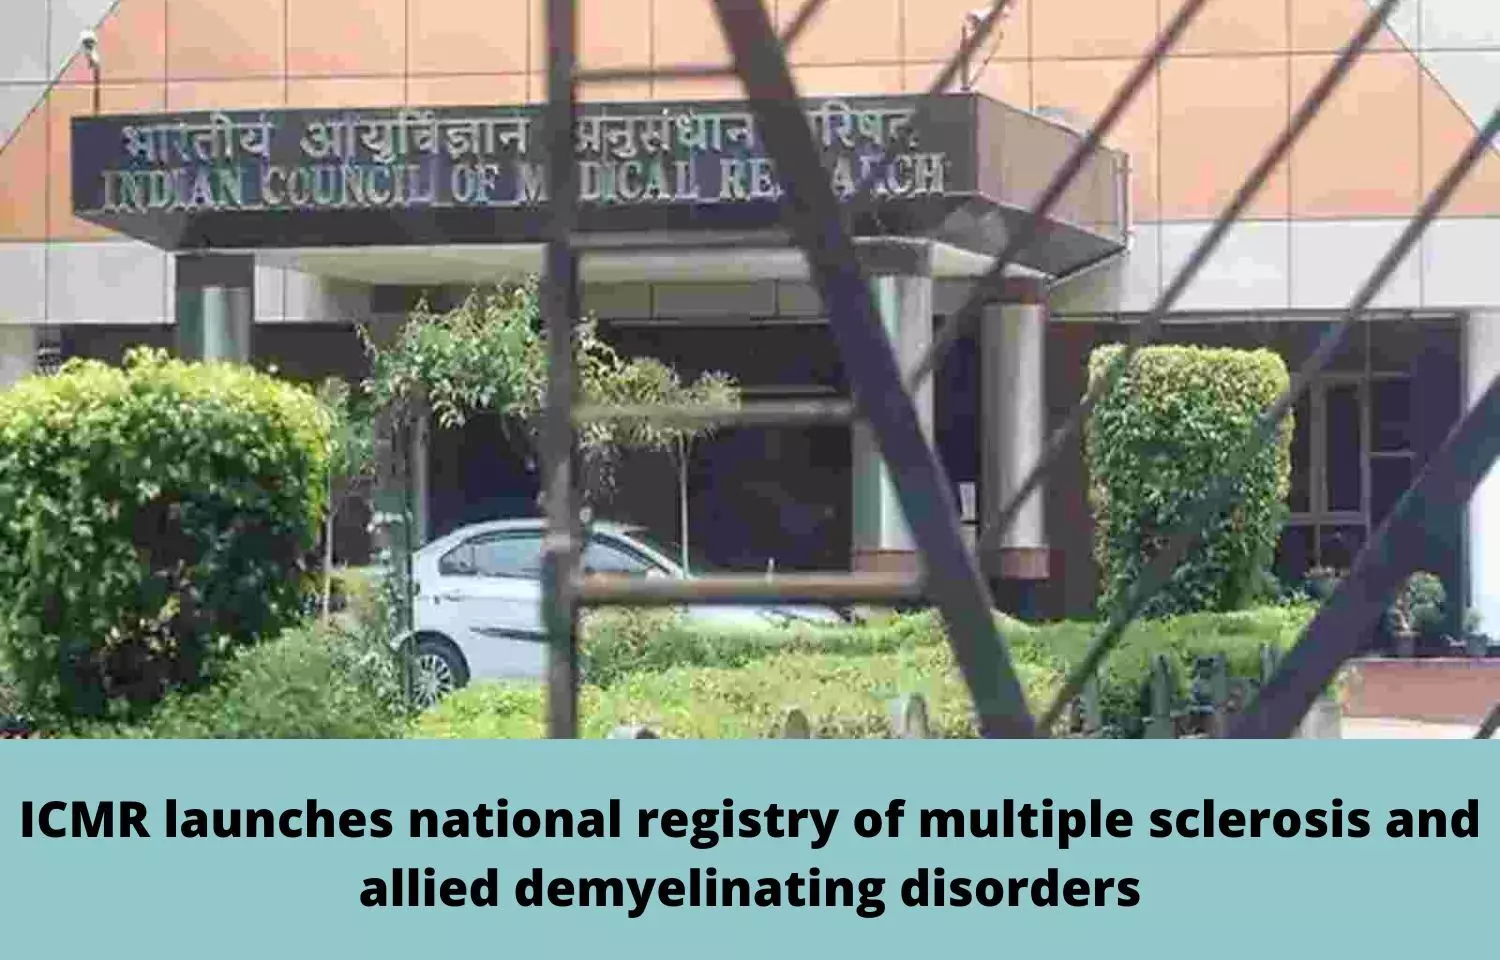 ICMR launches national registry of multiple sclerosis and allied demyelinating disorders